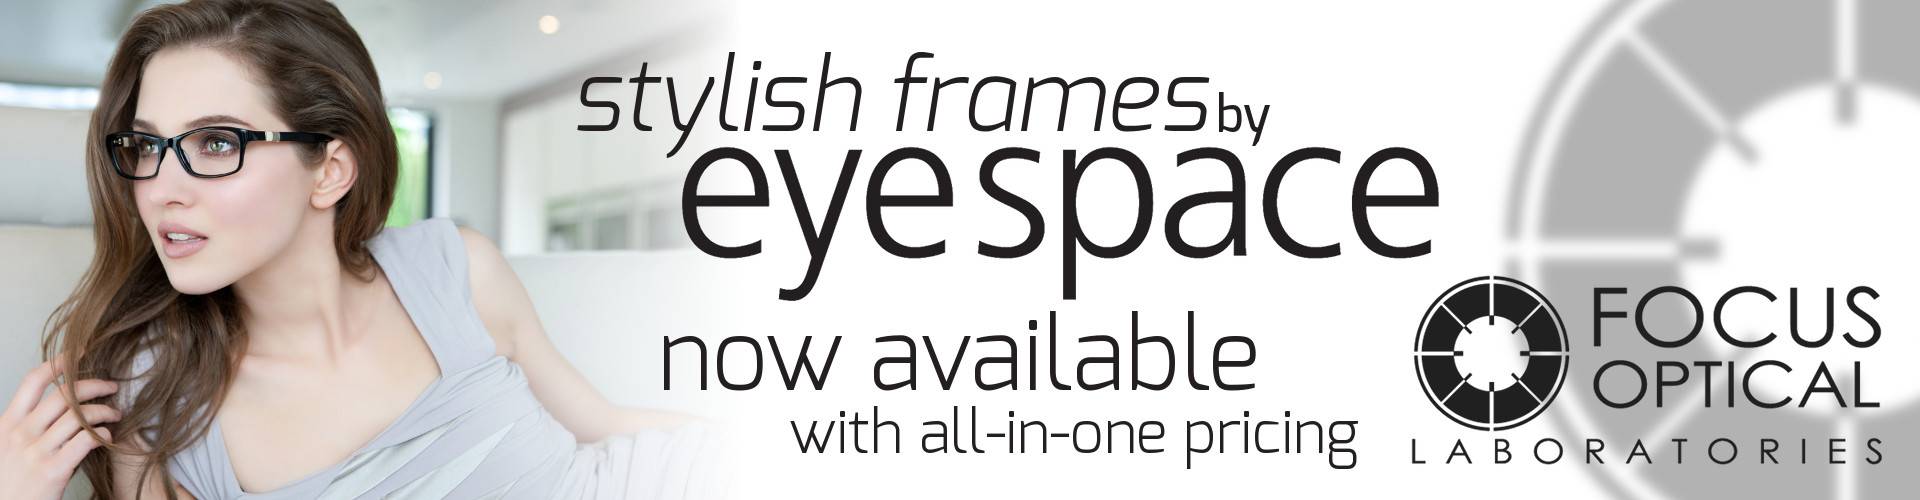 Stylish frames by eyespace now available at Focus Optical